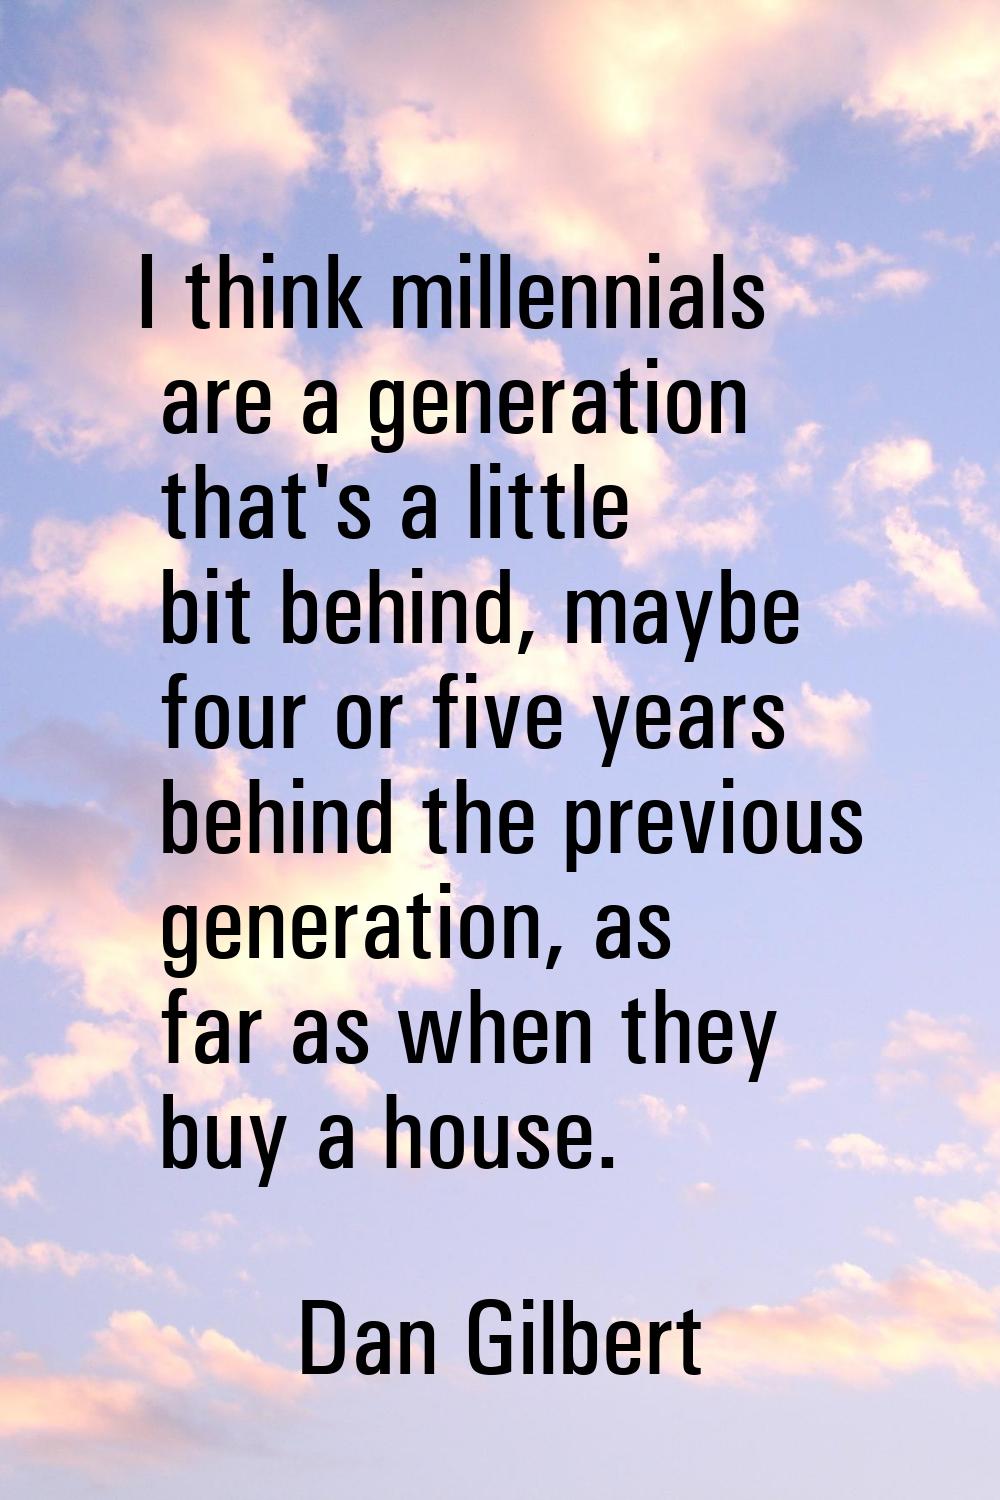 I think millennials are a generation that's a little bit behind, maybe four or five years behind th